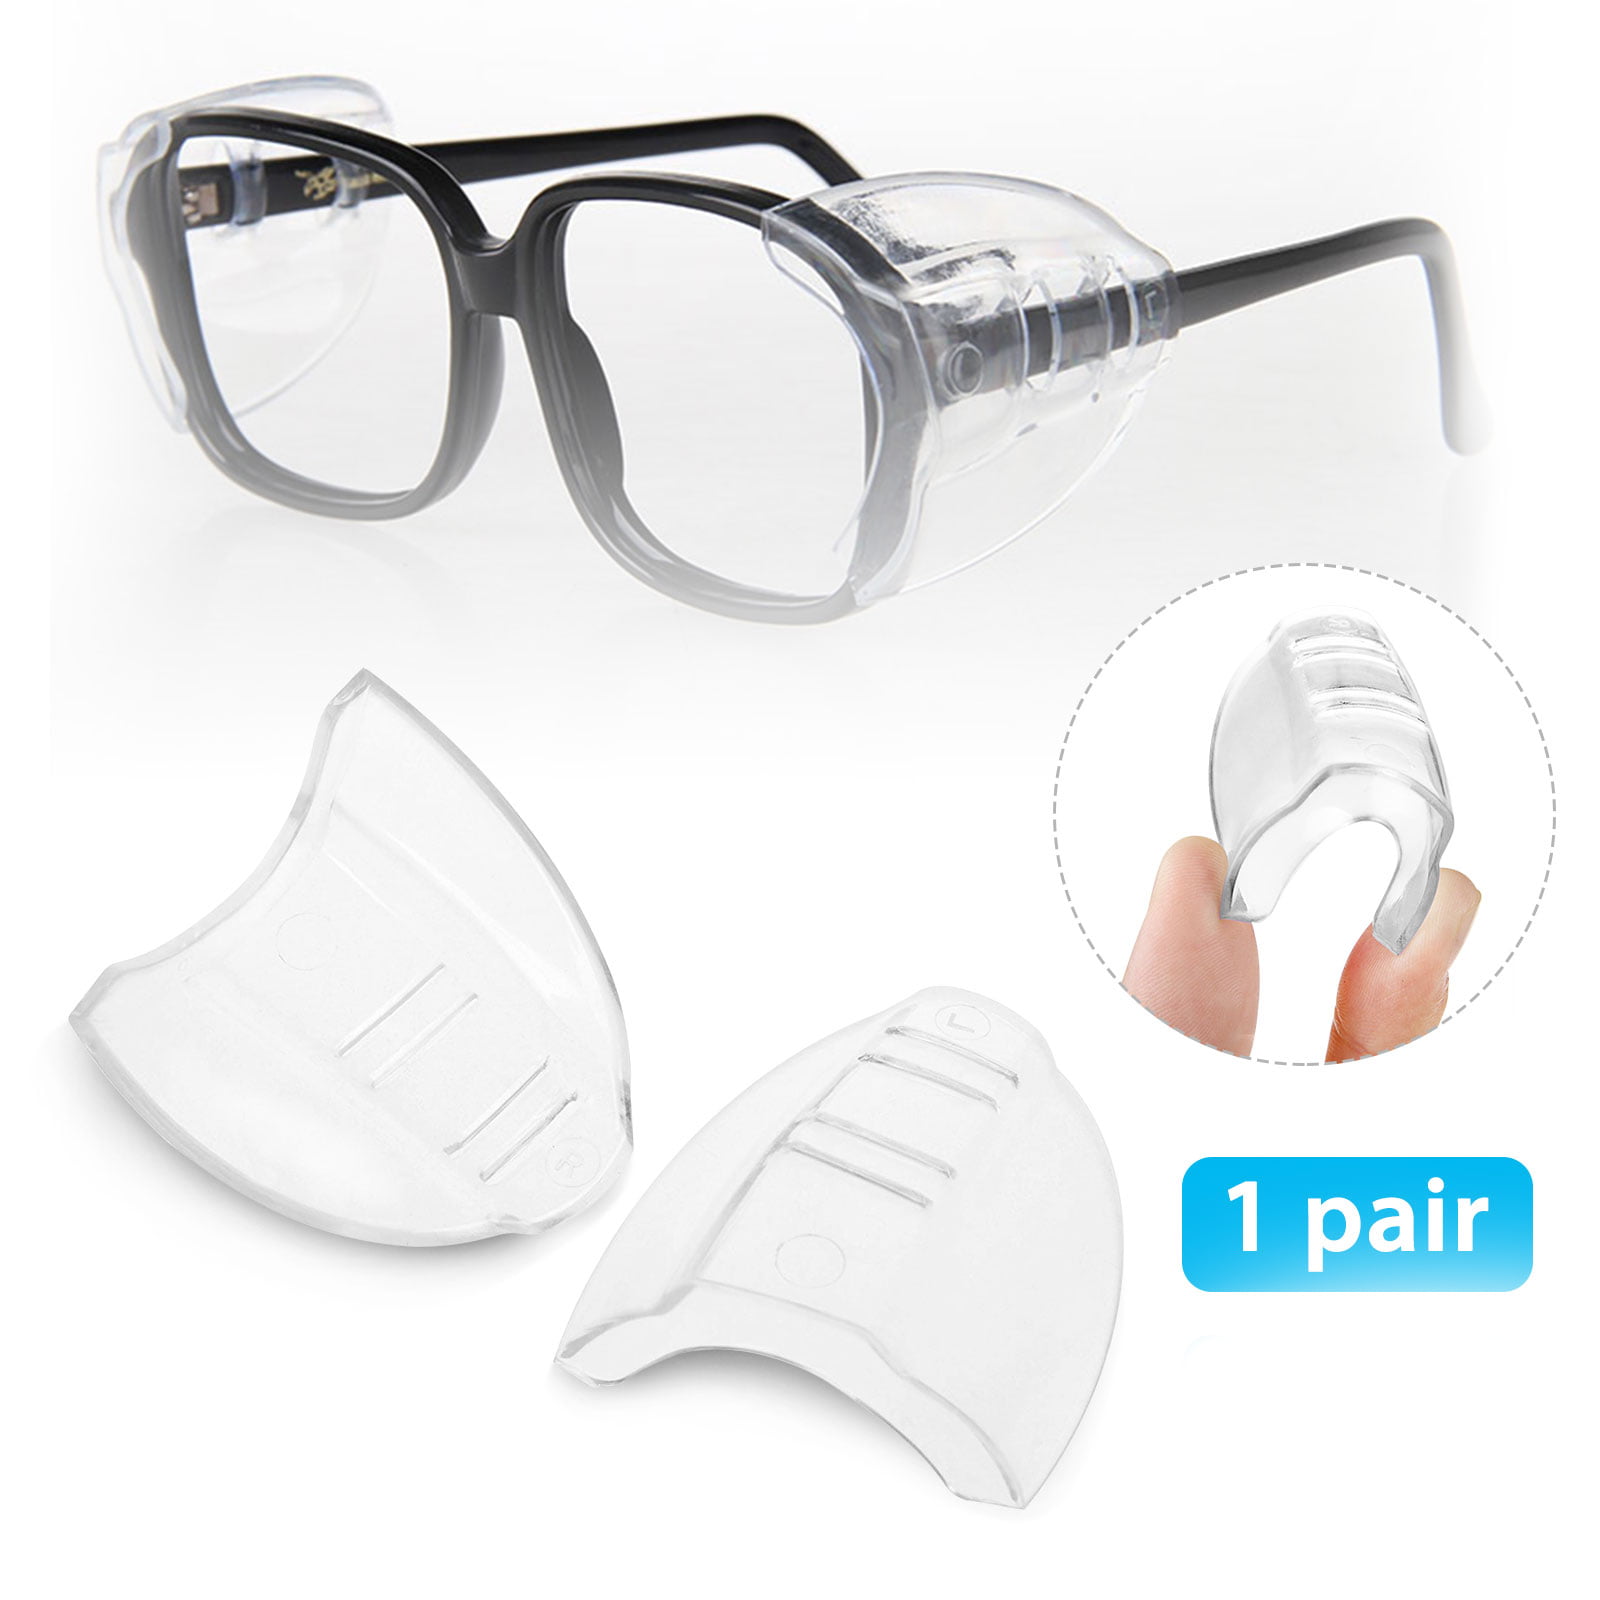 One Pair Slip On Clear Side Shields for Safety Glasses, Safety Glasses ...